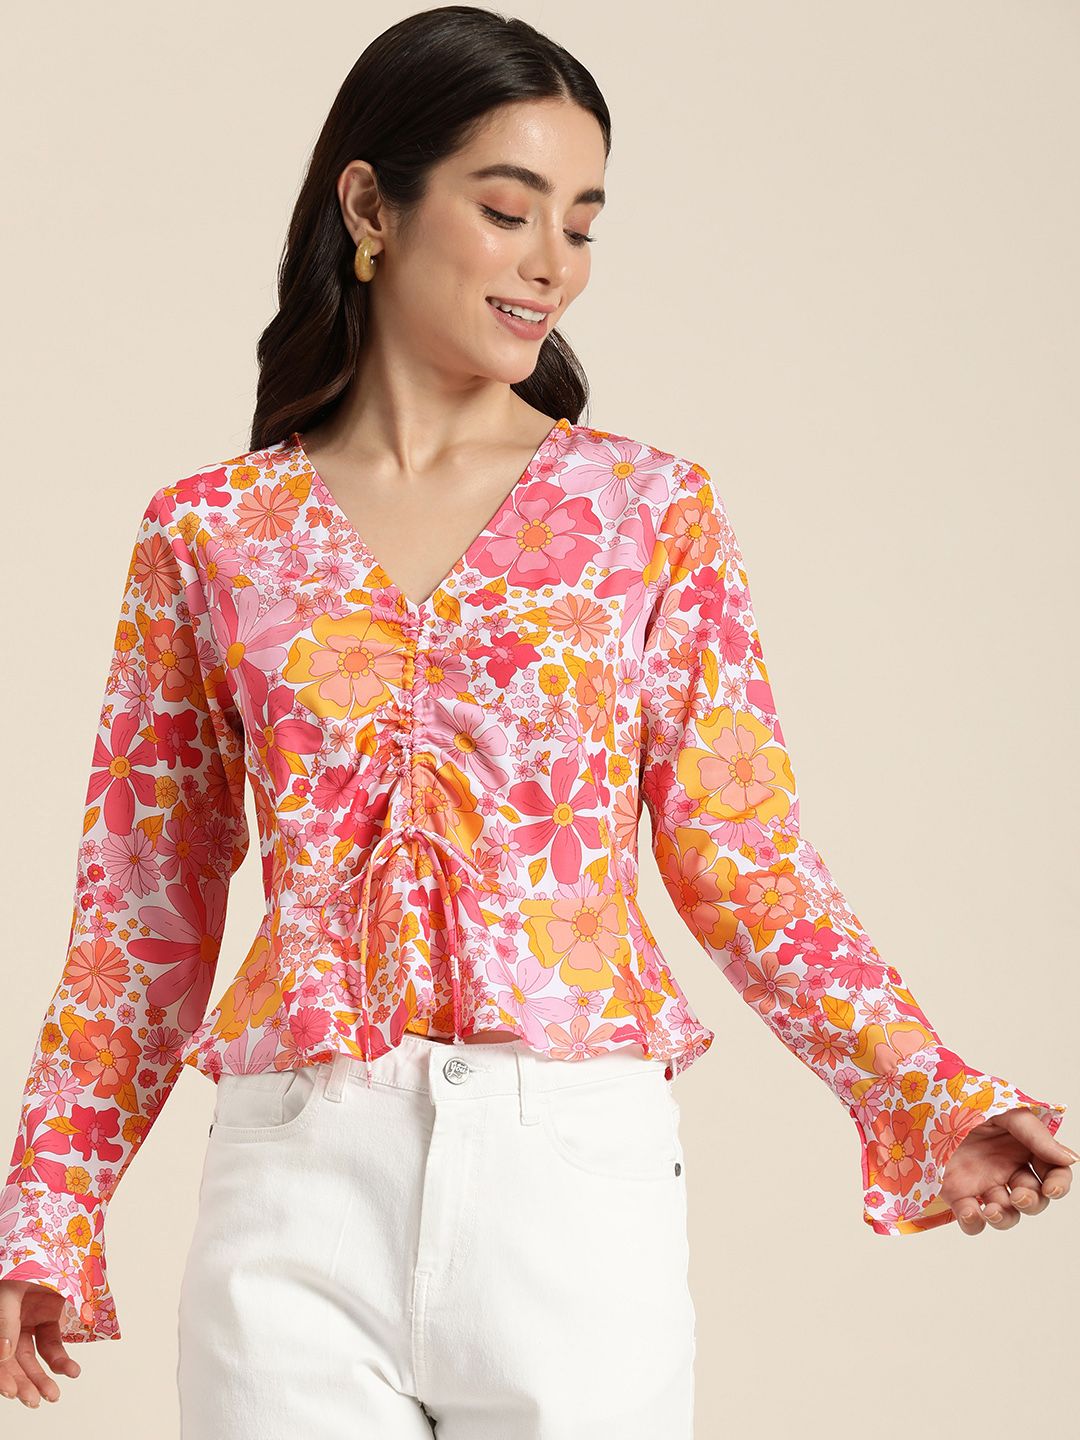 encore by INVICTUS Floral Print Bell Sleeve Peplum Top Price in India